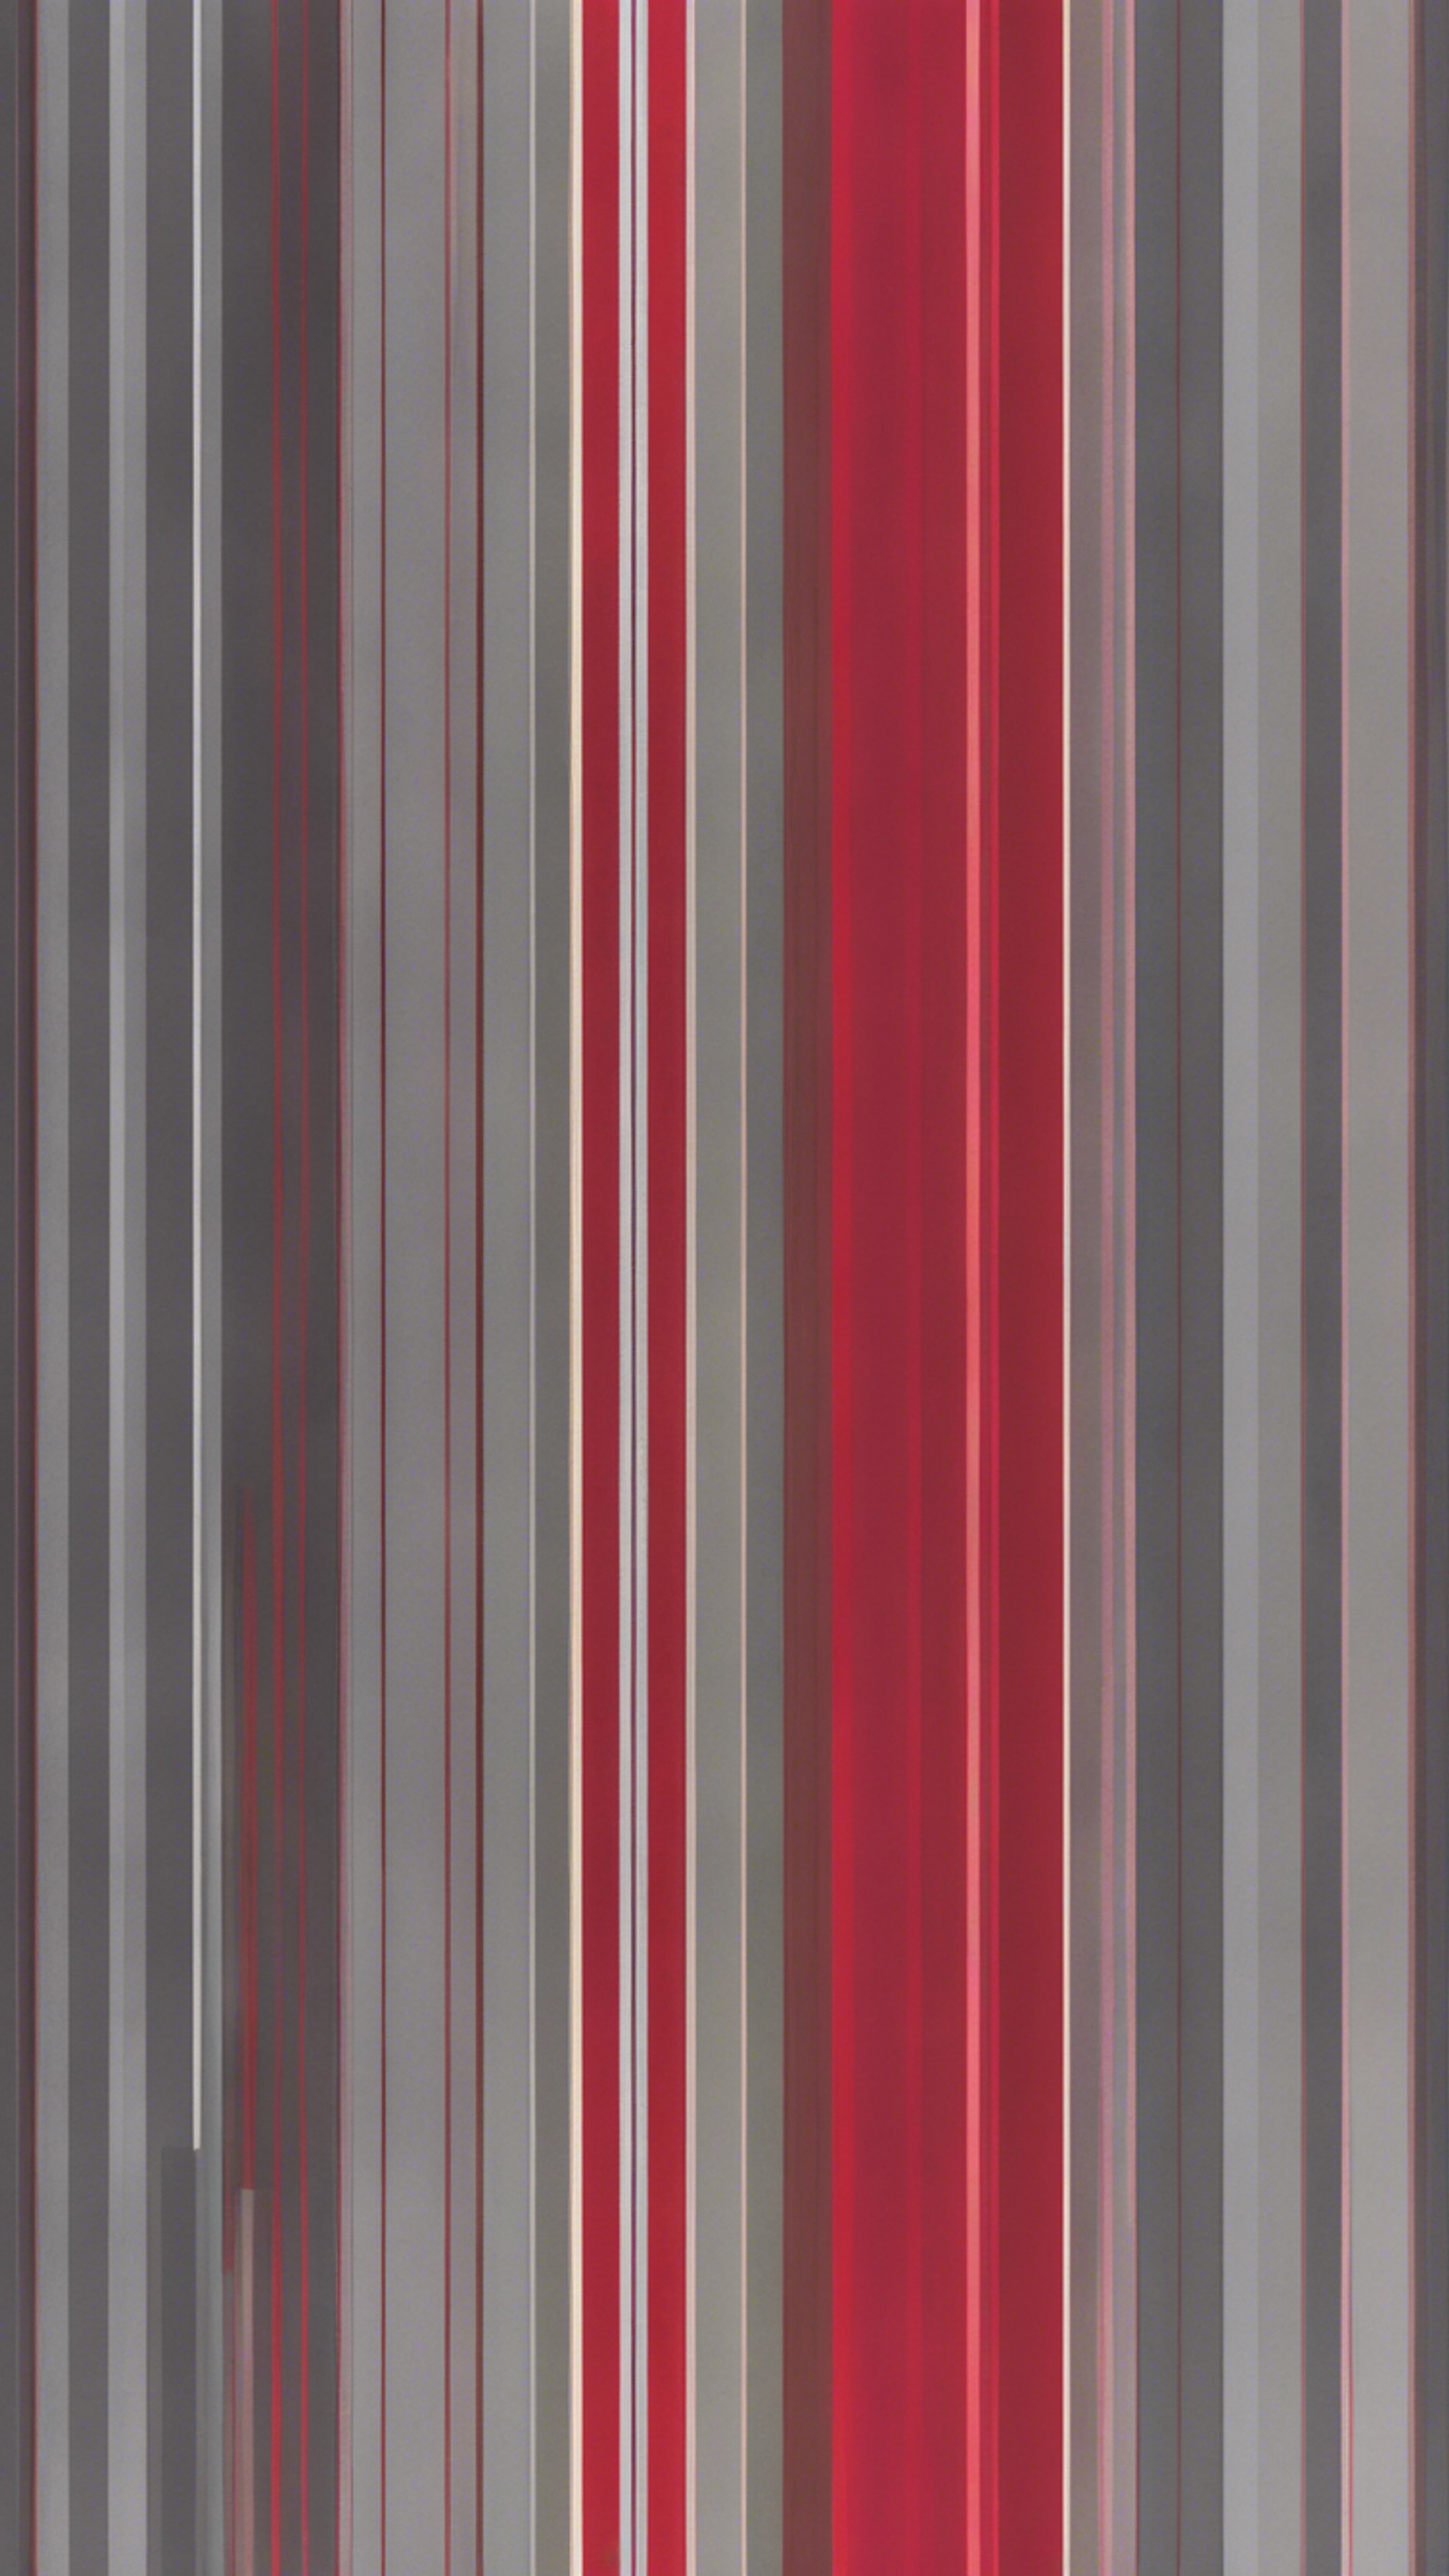 Pattern inspired by modern art, showcasing alternating bands of red and grey in a gradient arrangement. טפט[fecd92d91f0c4817b510]